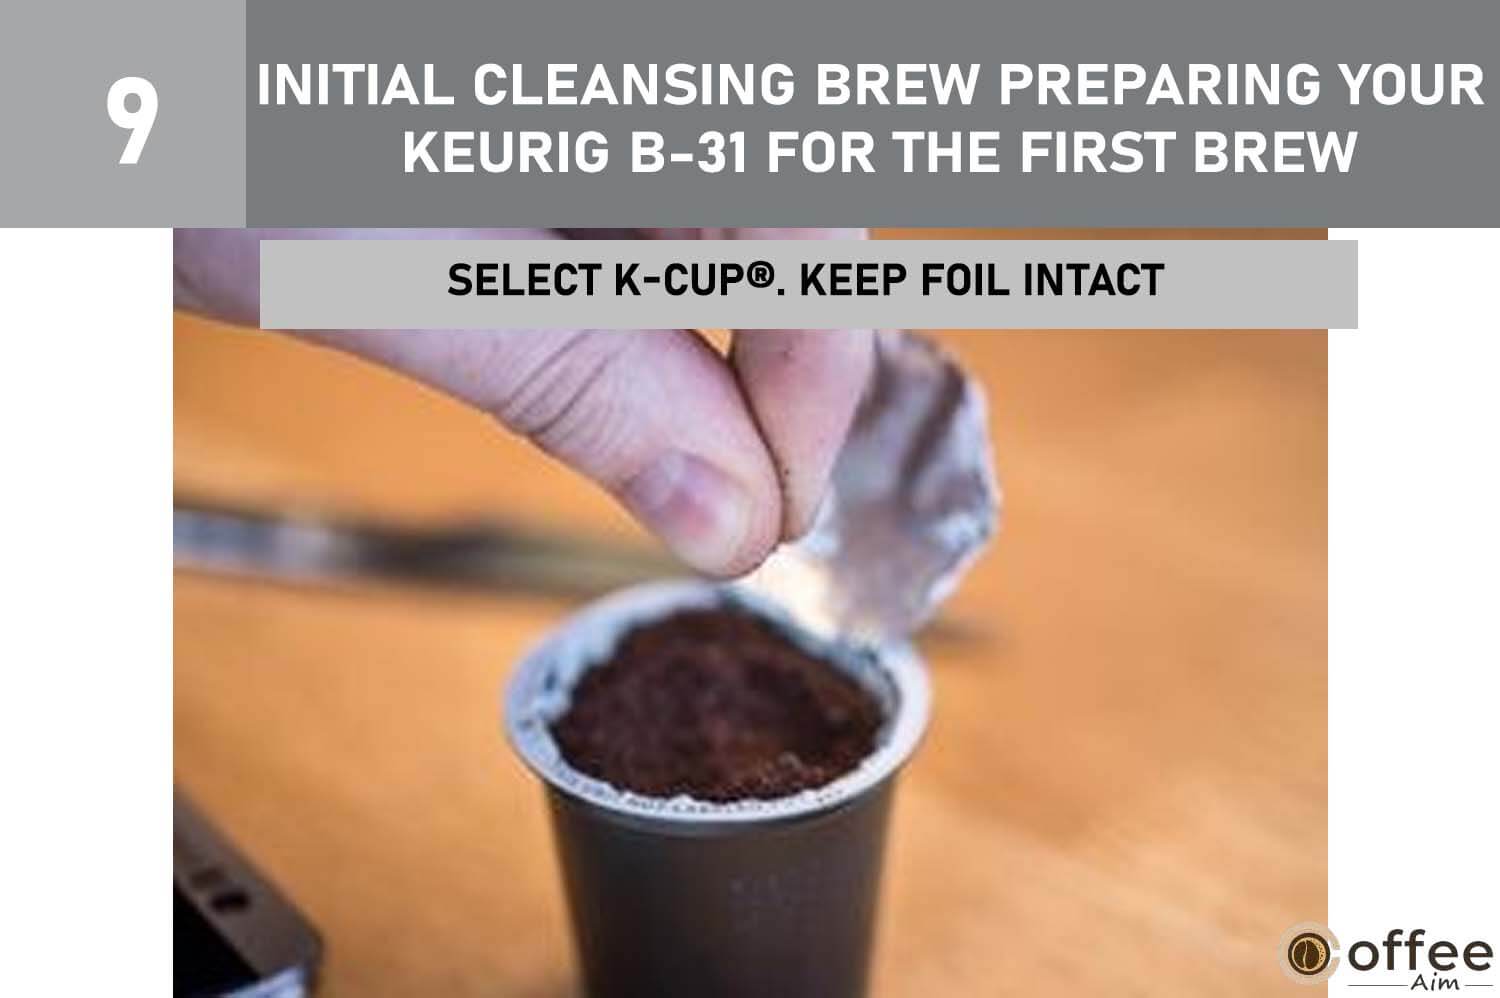 This illustration depicts the step 'Choose a K-Cup, keep foil intact' as part of the initial cleansing brew process, preparing your Keurig B-31 for its first brew.